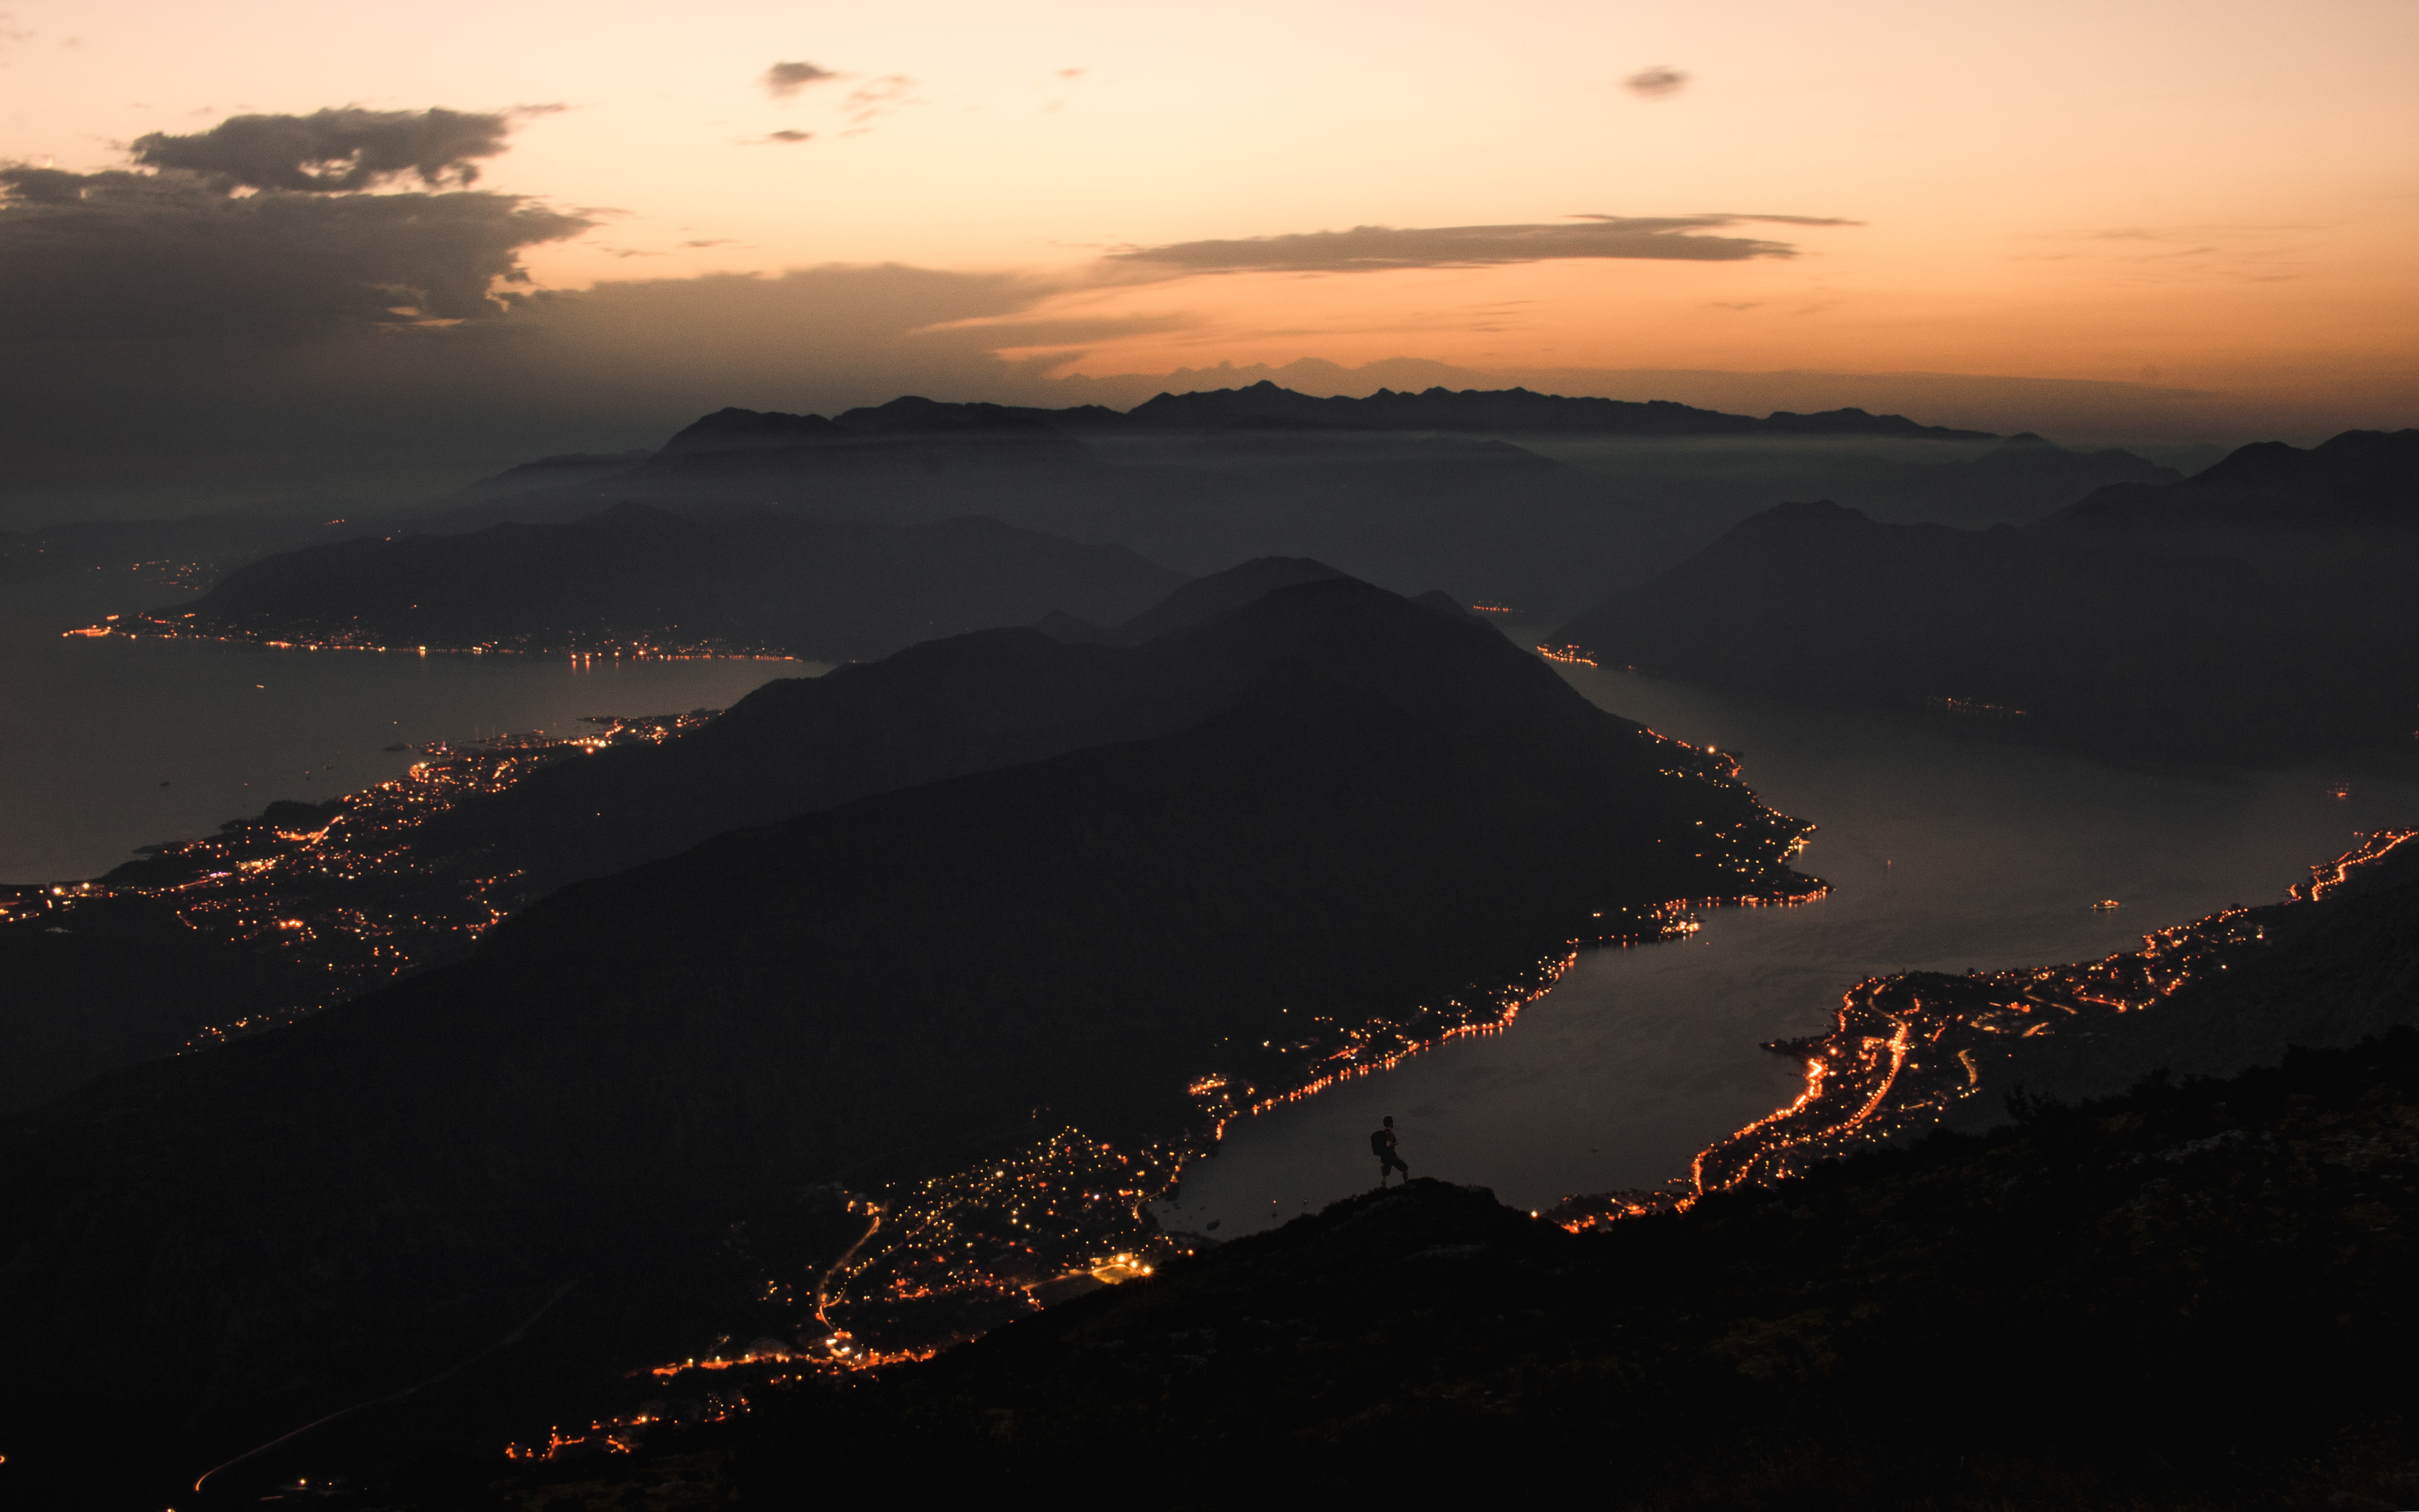 lights, night, dark, mountains, coast, city, view from above cellphone